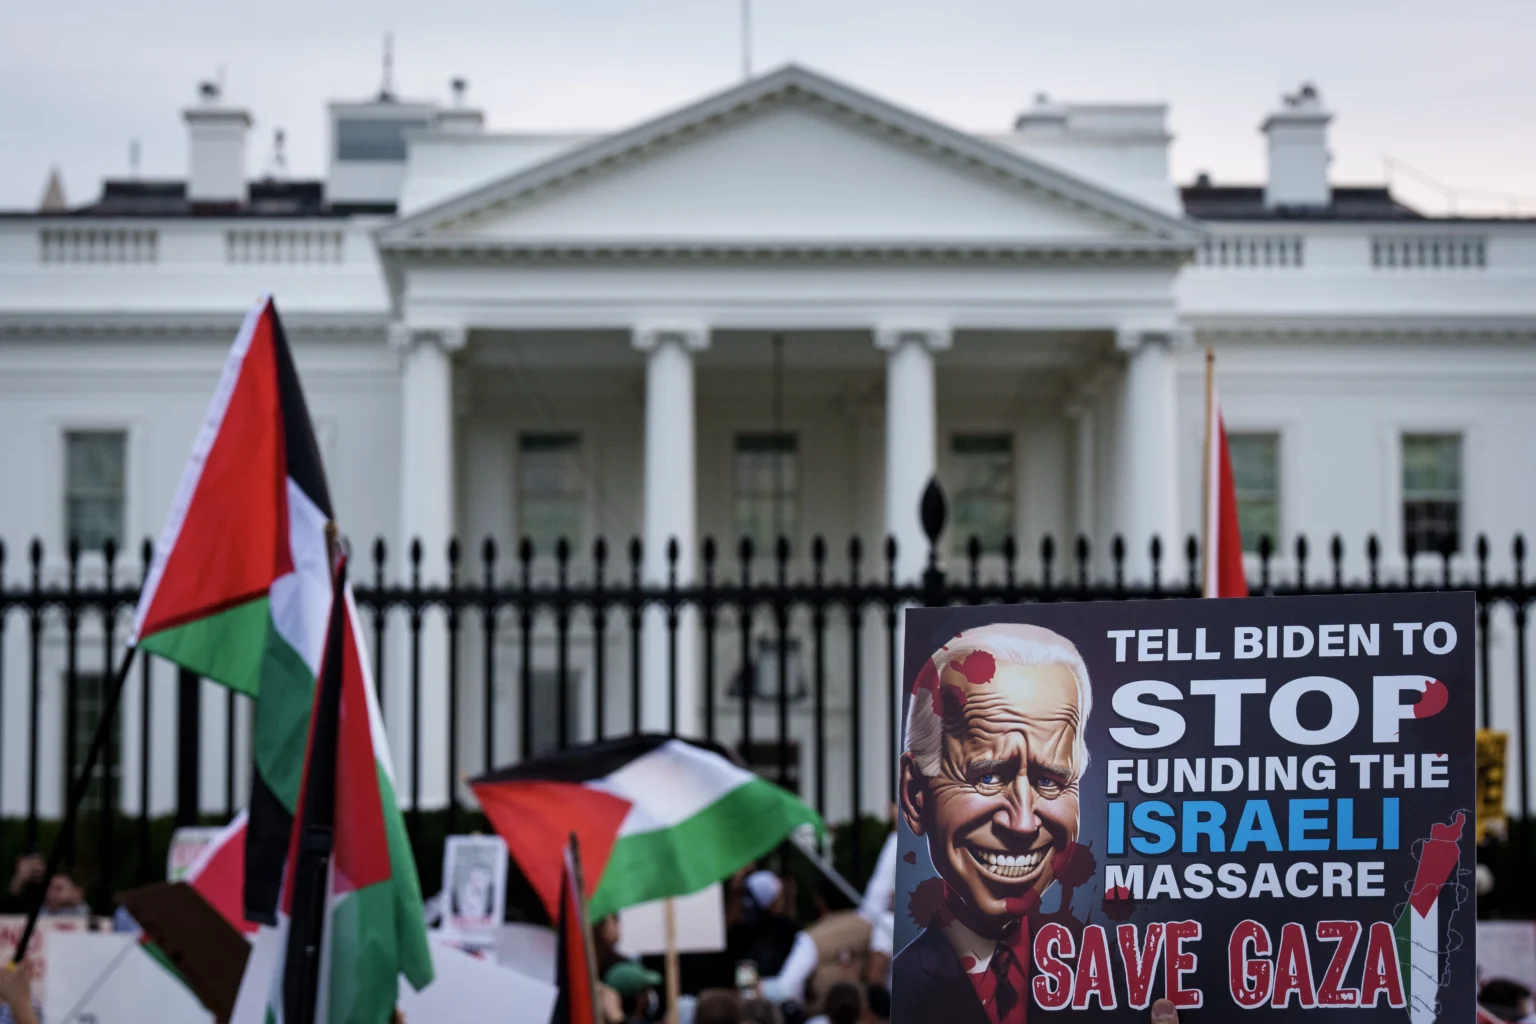 joe-biden-acknowledges-pain-being-felt-by-arab-americans-over-gaza-and-over-us-support-of-israel